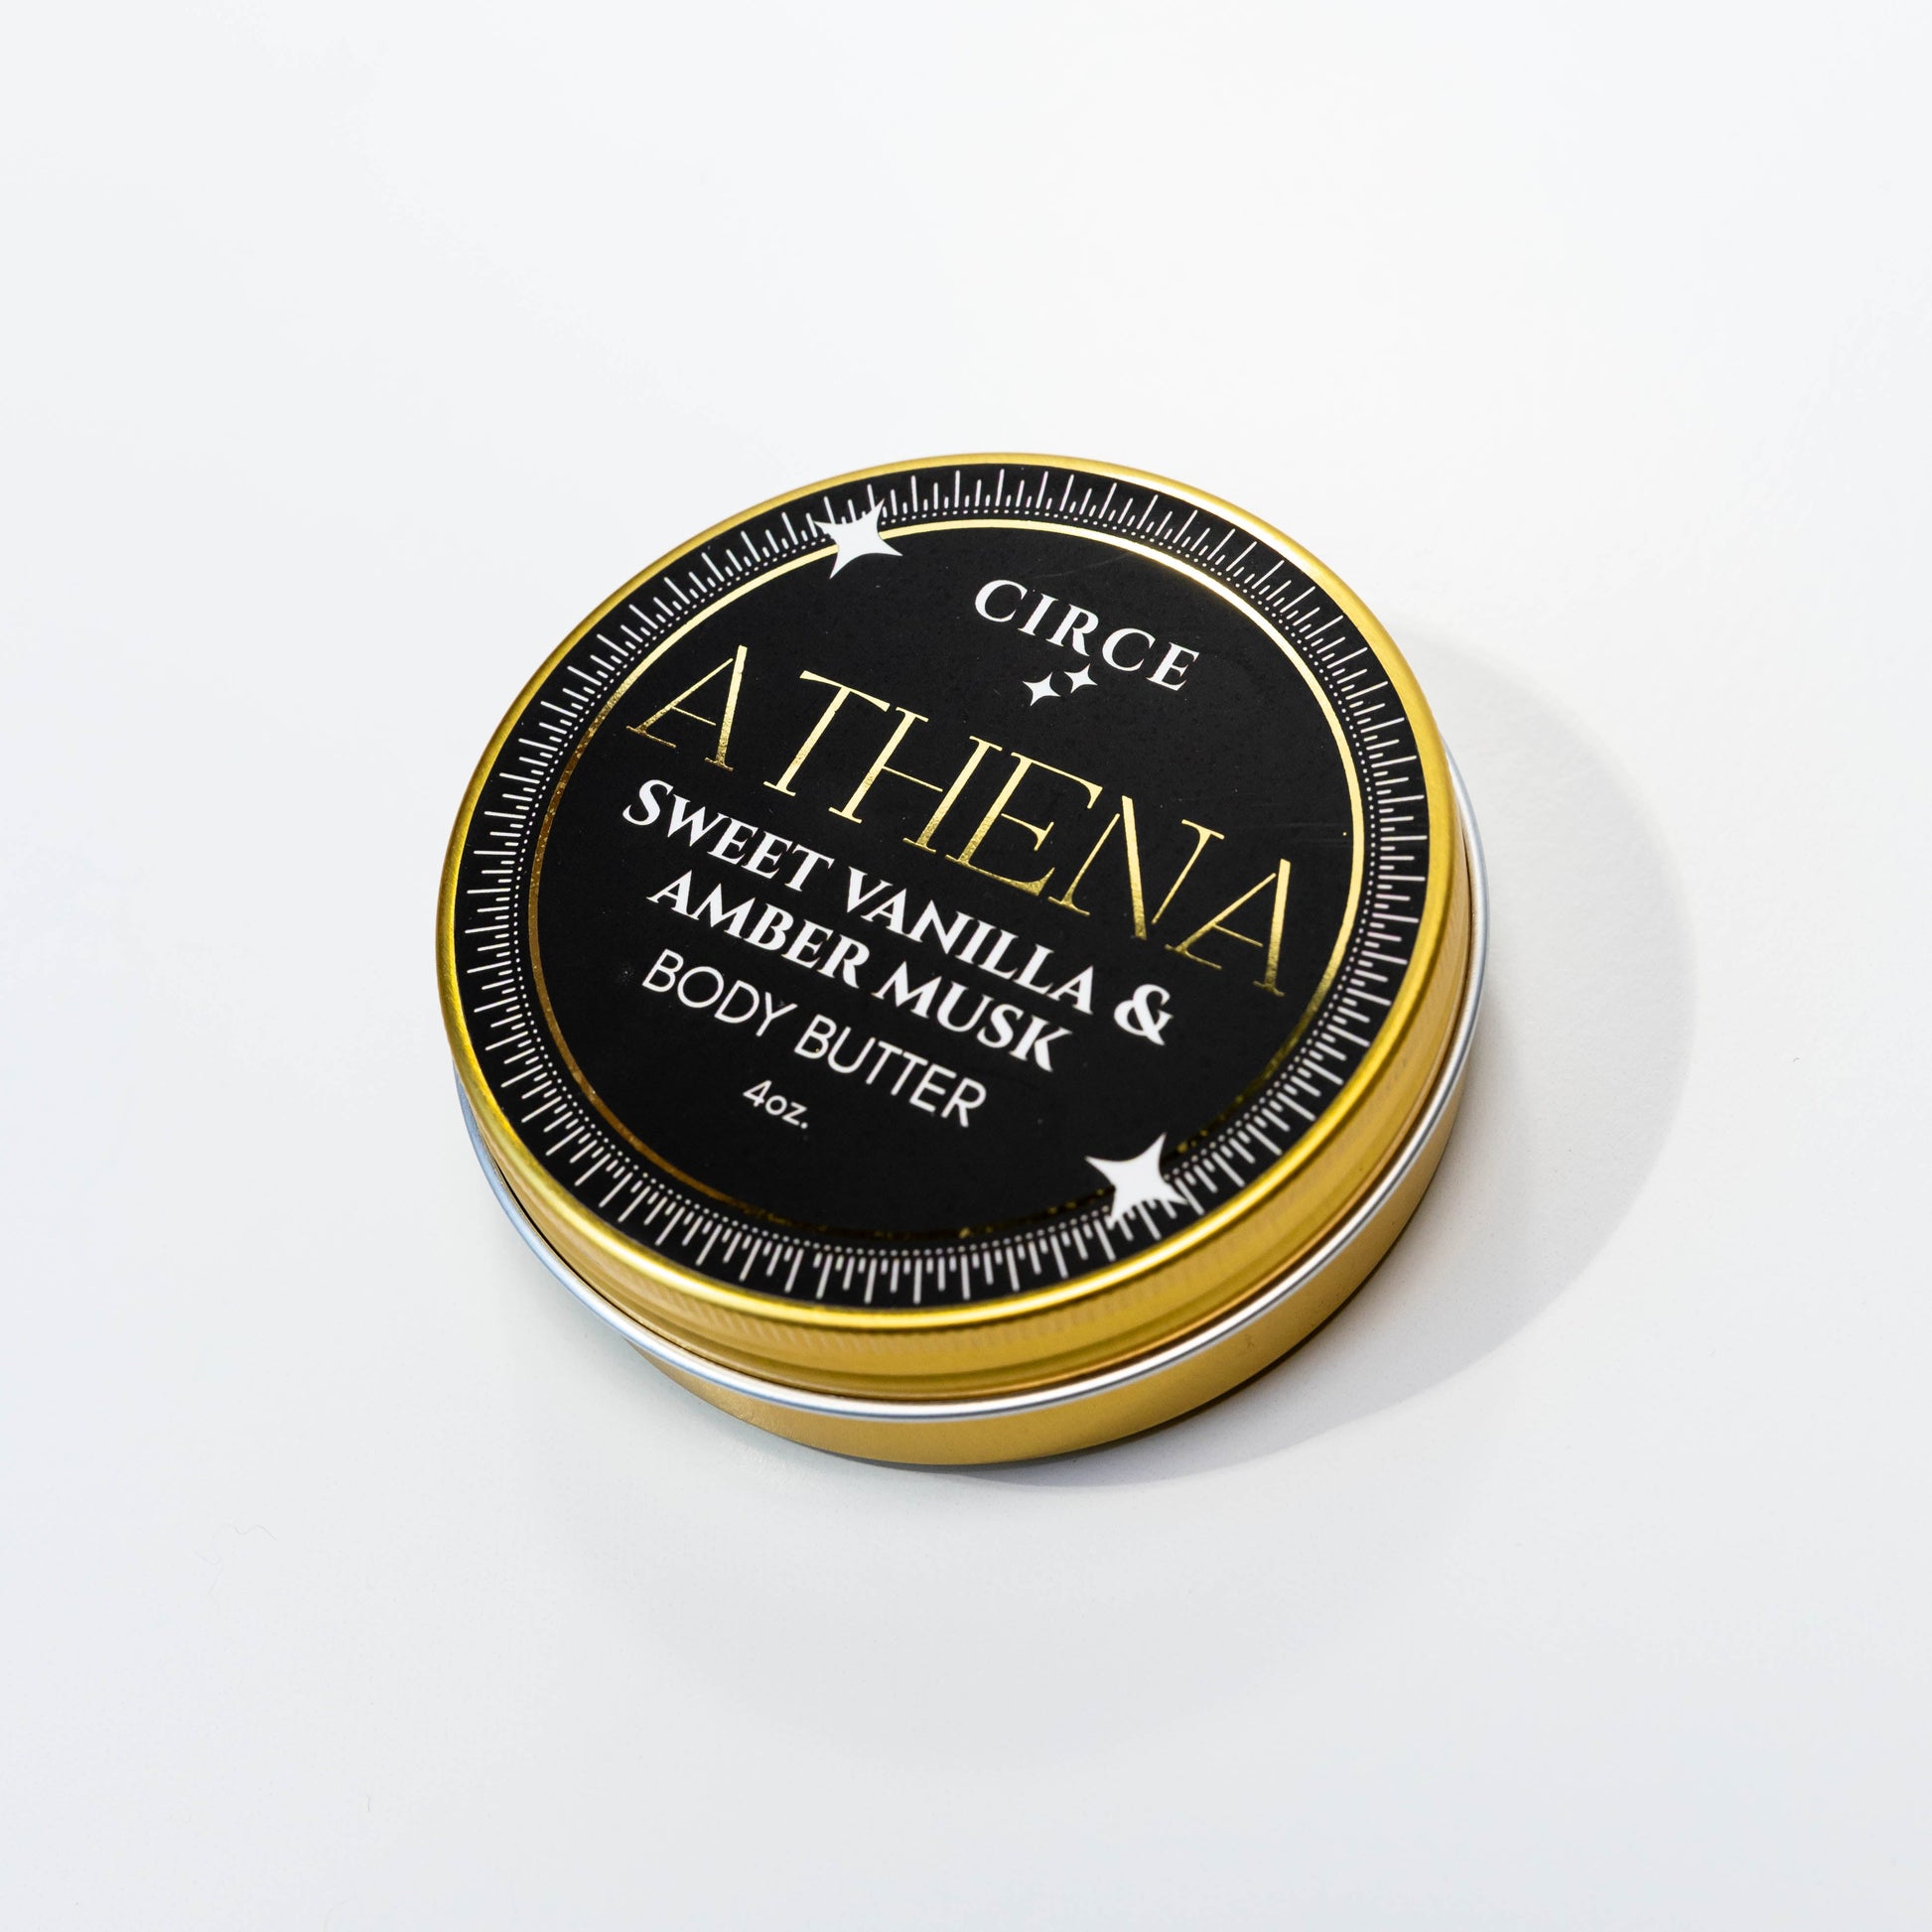 CIRCE Athena Body Butter  from Circe Boutique